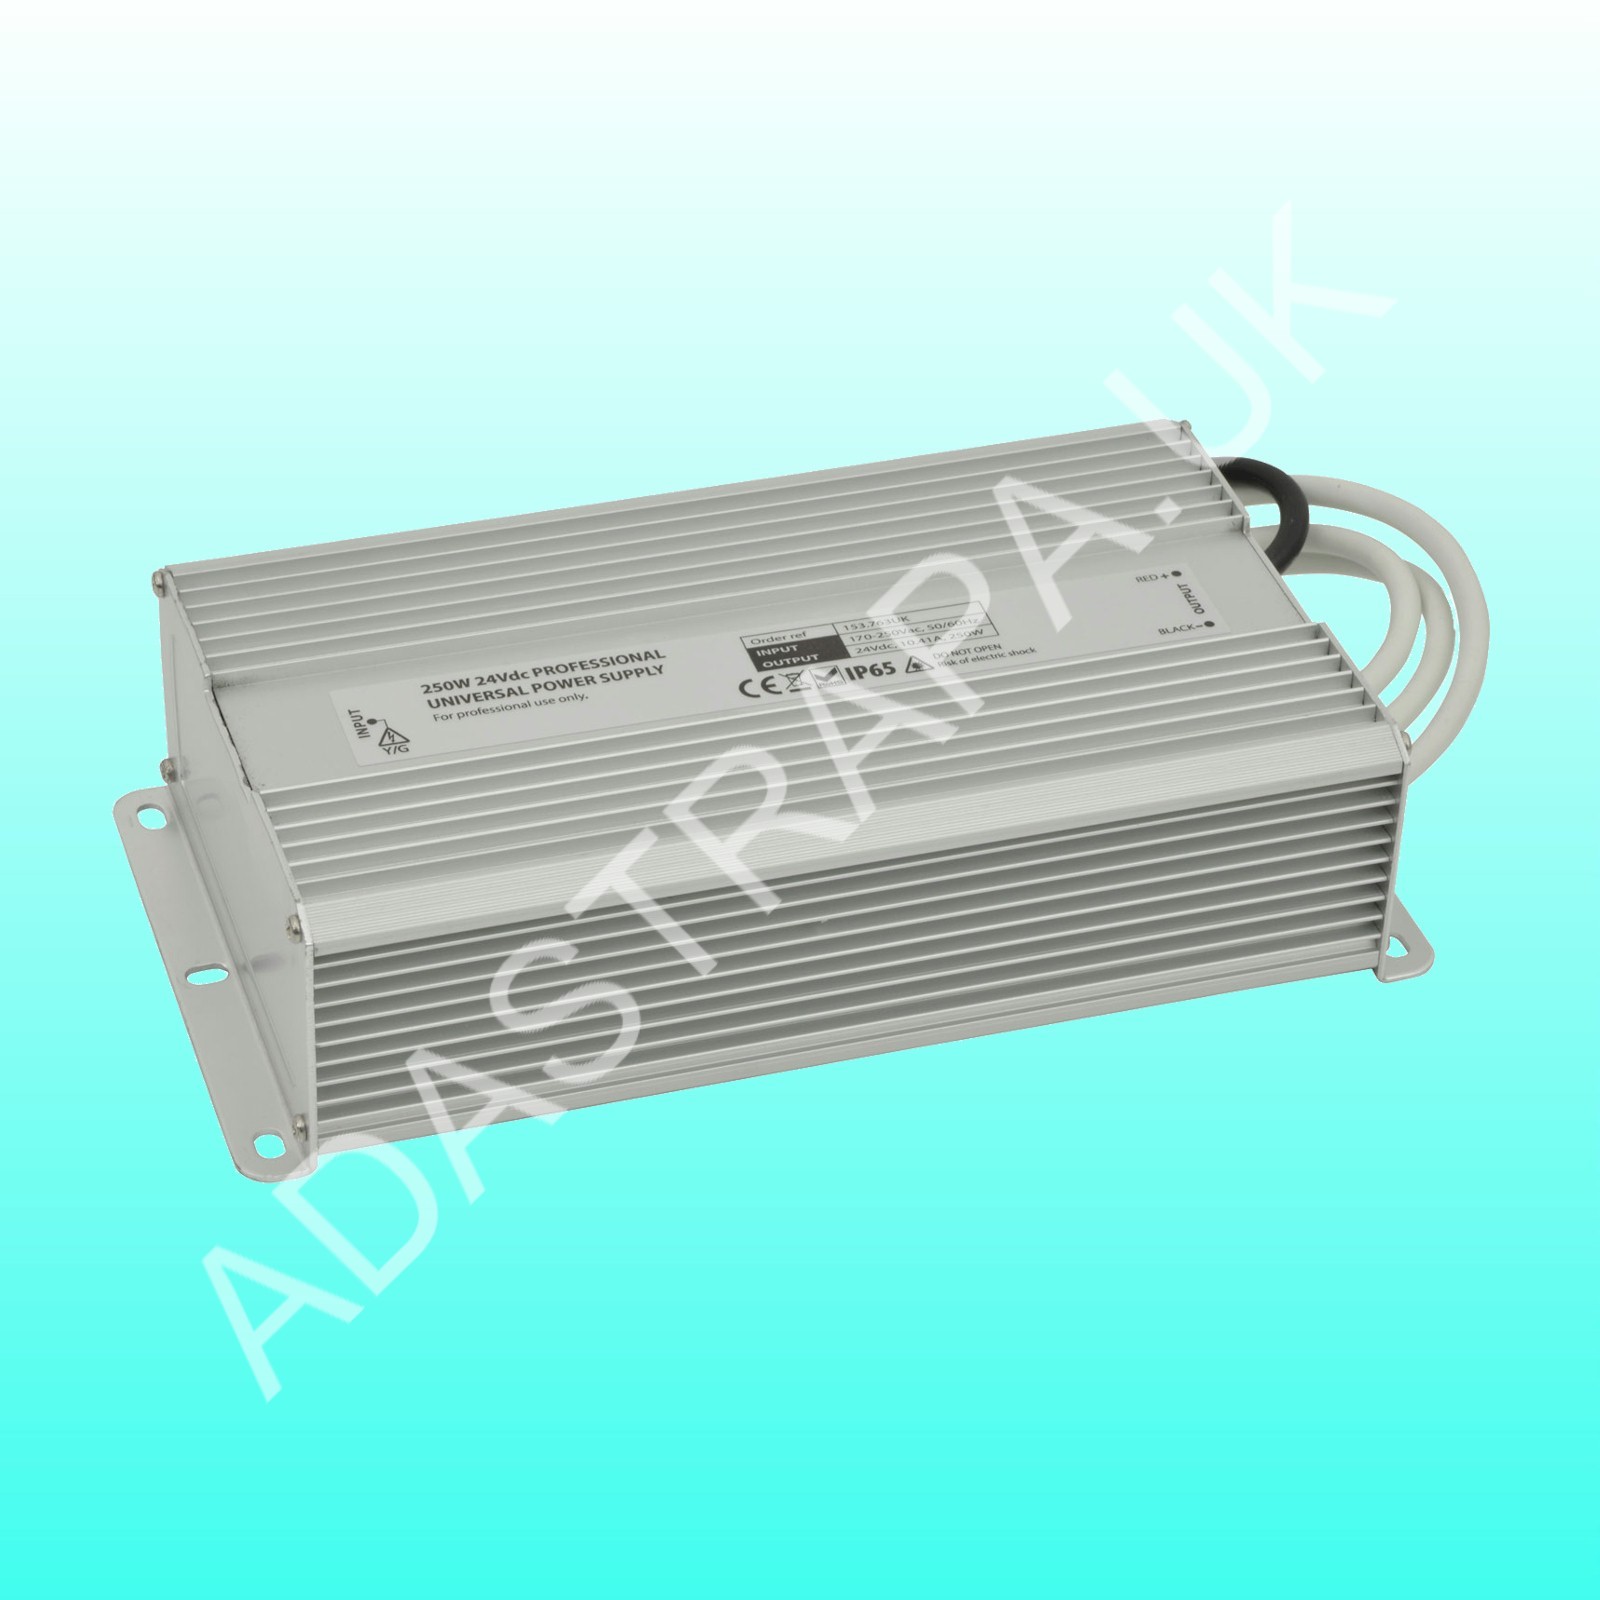 Lyyt PS250-24 Power Supply 24Vdc 10.4A 250W  - 153.763UK